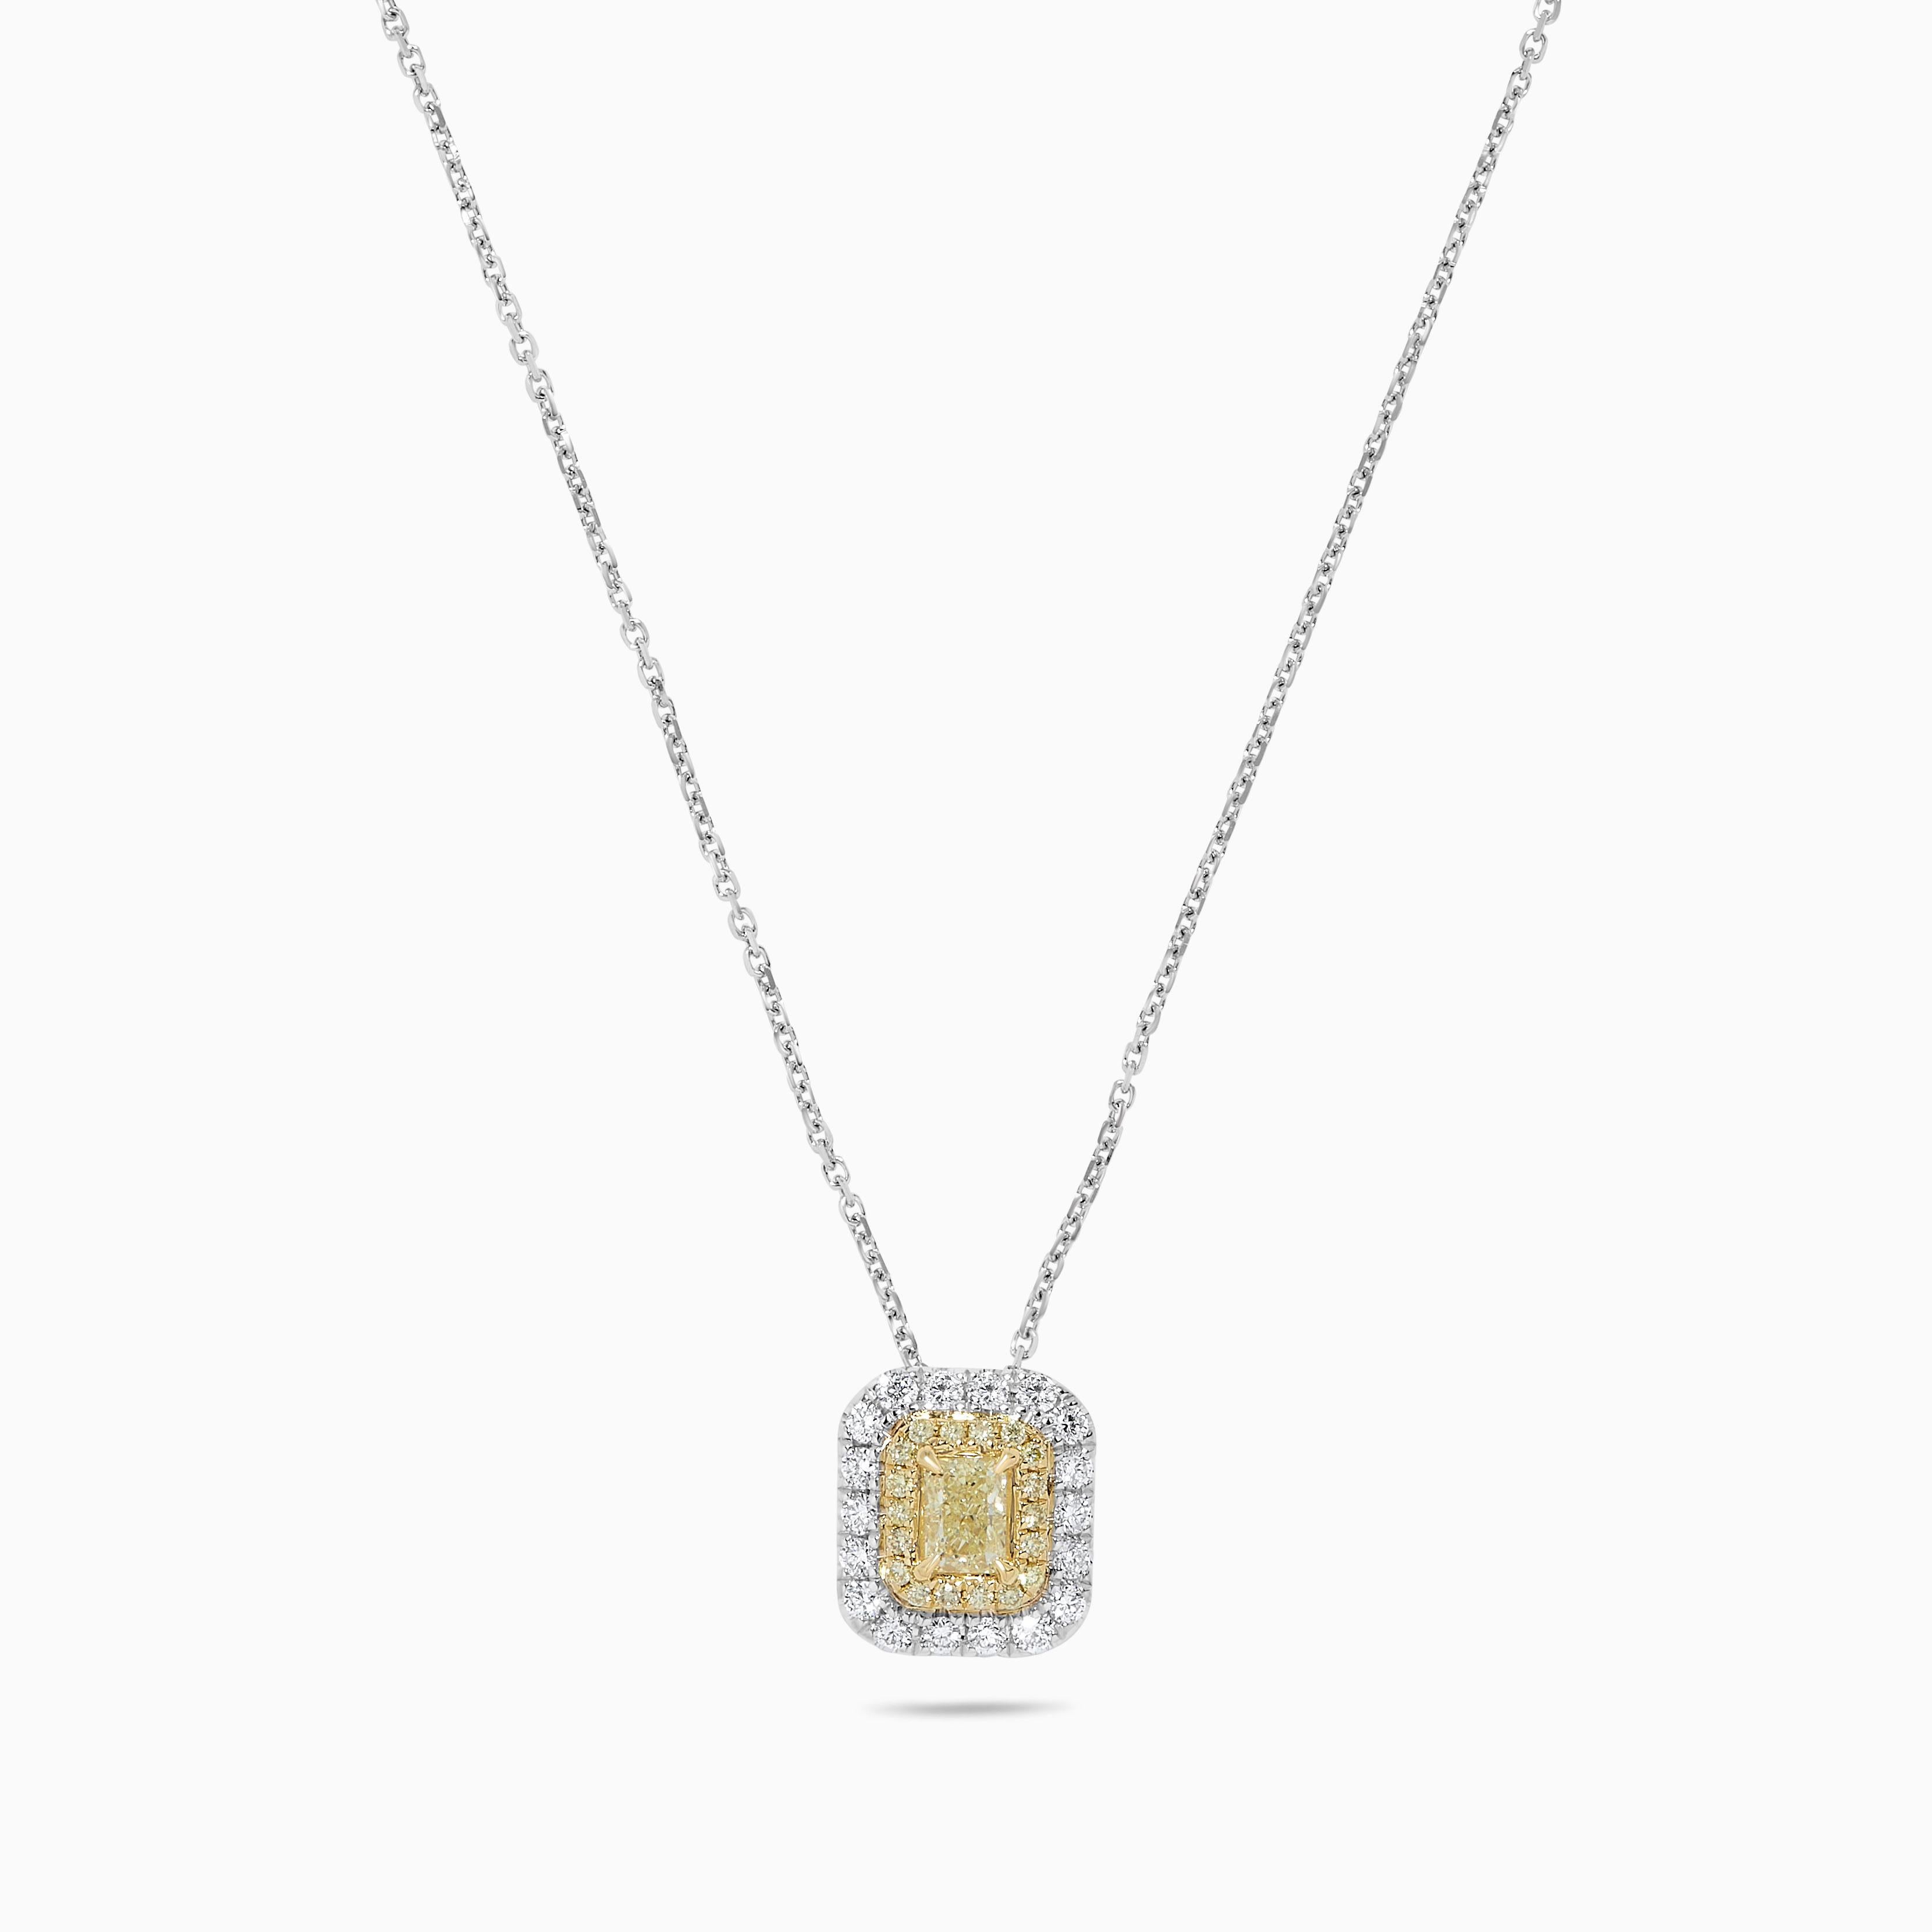 RareGemWorld's classic diamond pendant. Mounted in a beautiful 18K Yellow and White Gold setting with a natural radiant cut yellow diamond. The yellow diamonds are surrounded by round natural white diamond melee and round natural white diamond